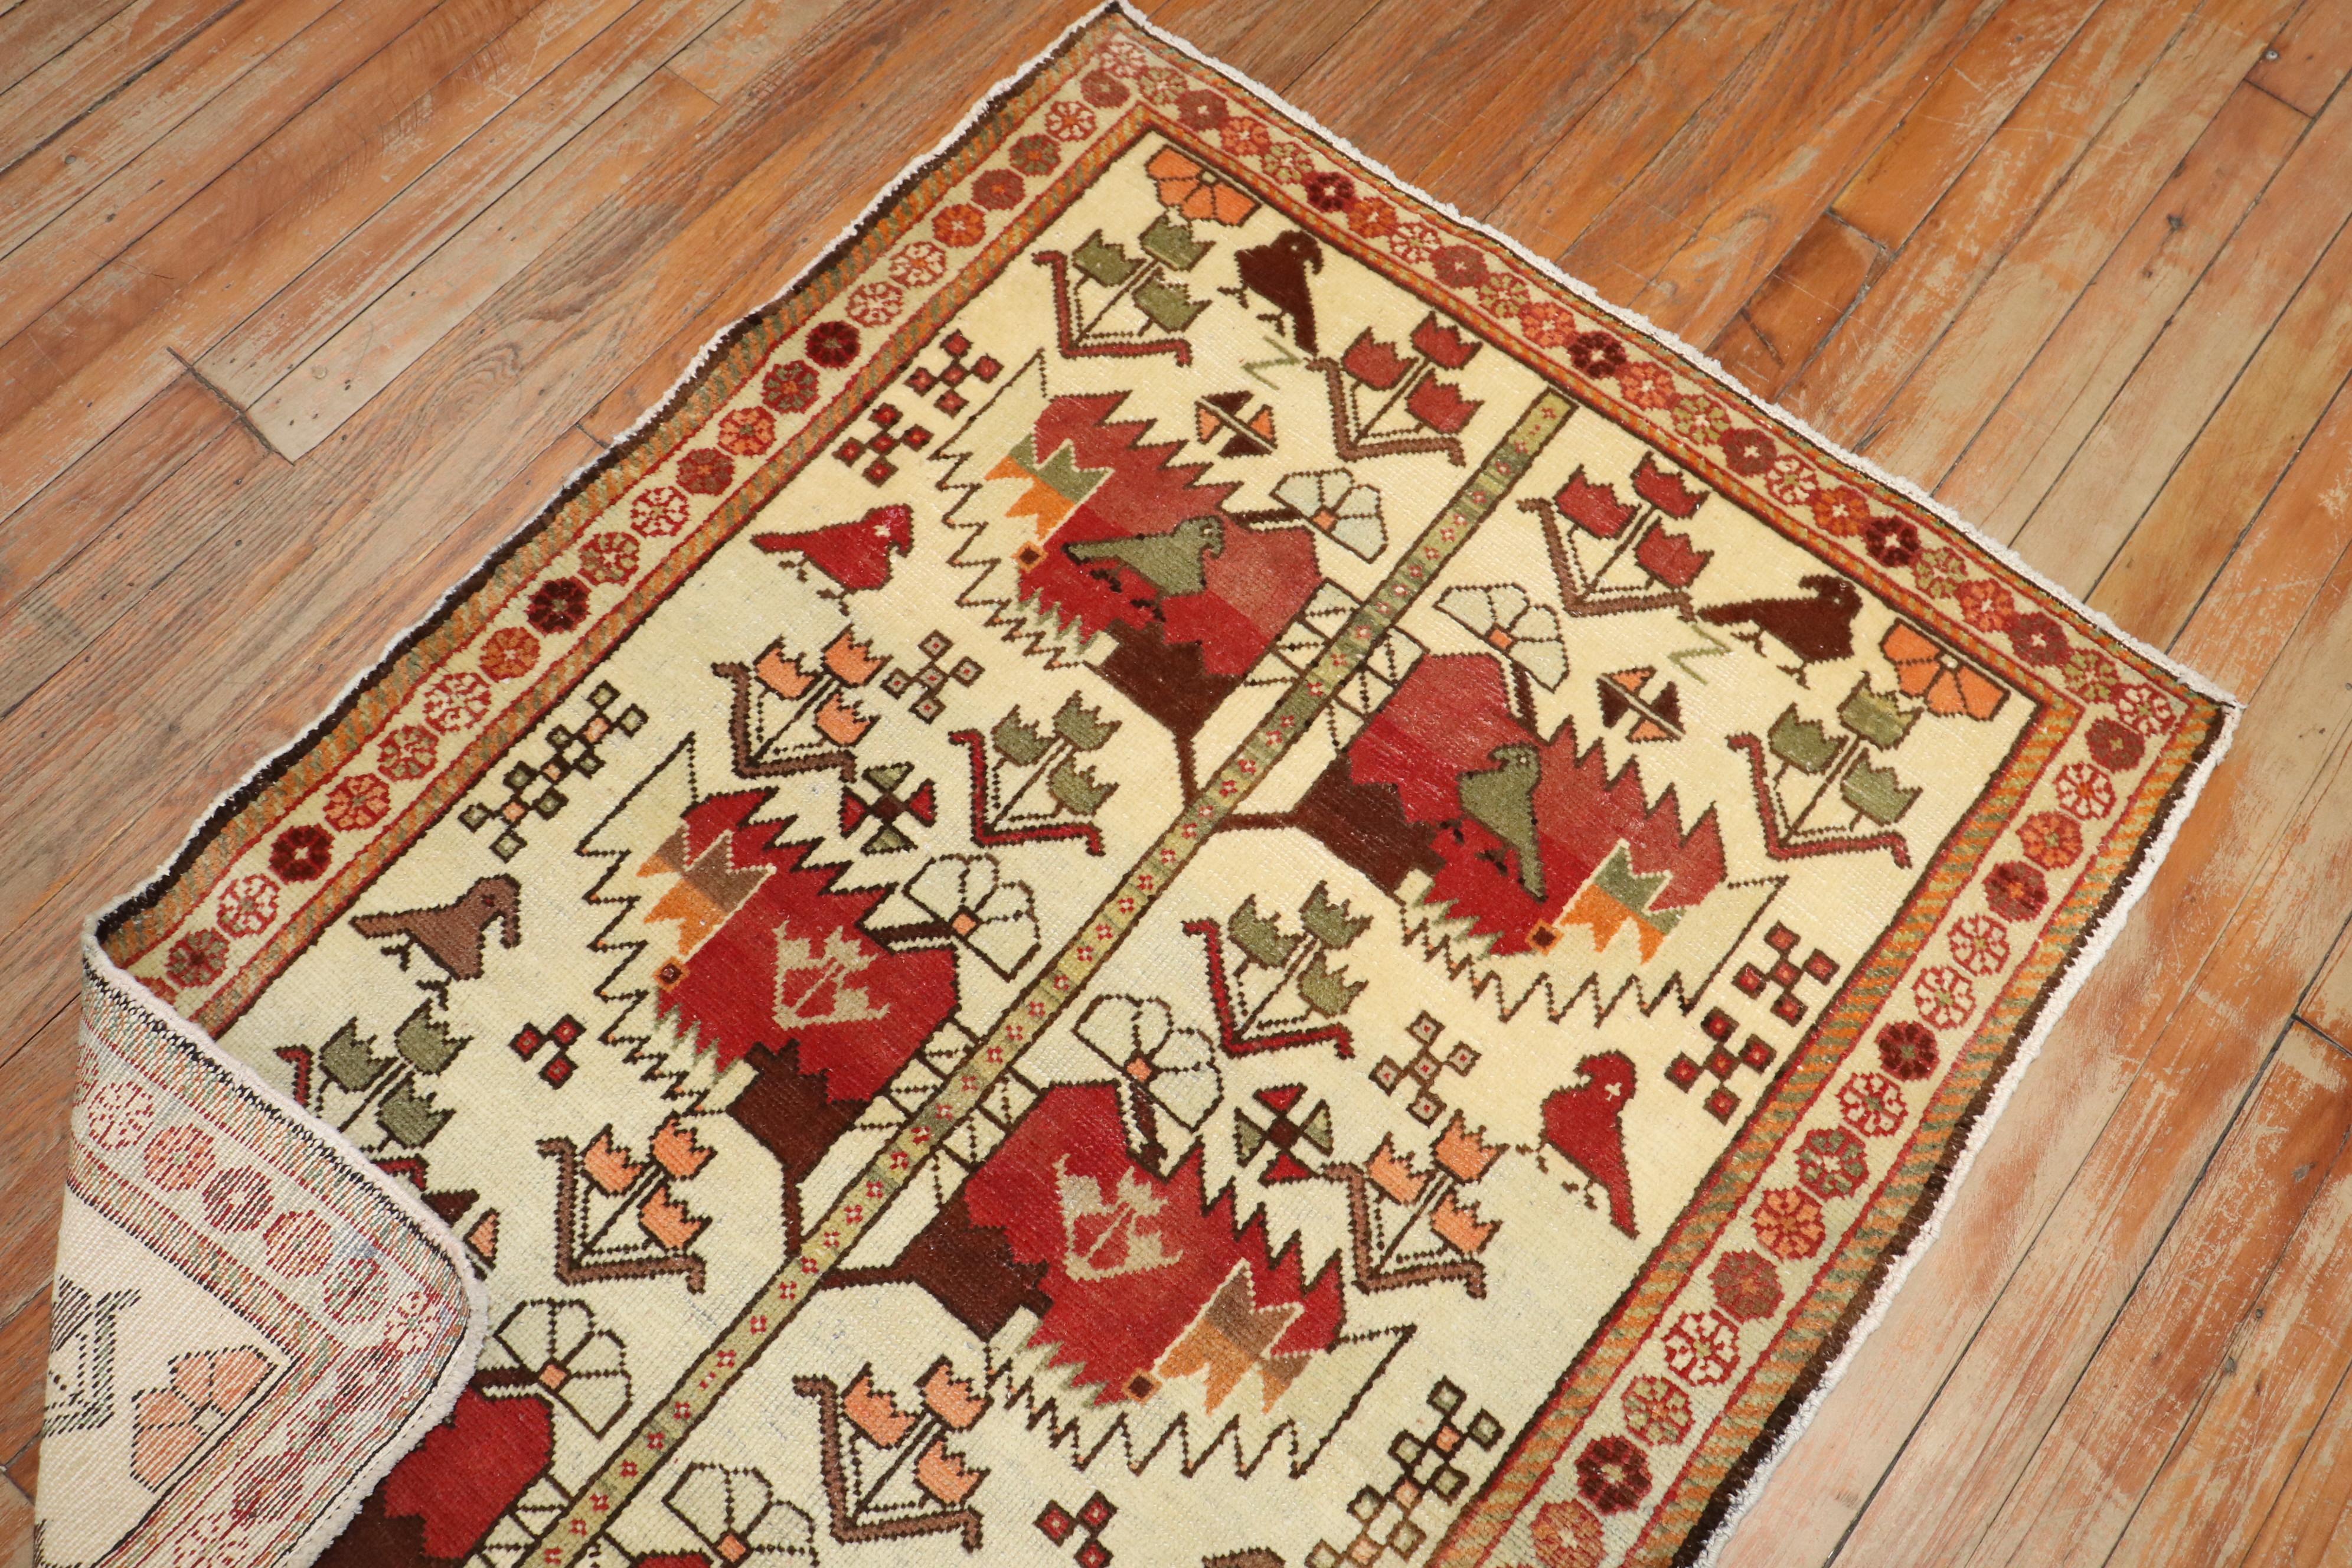 Mid-20th Century Persian Pictorial small square rug

Measures: 3'' x 4'1'' circa 1940.